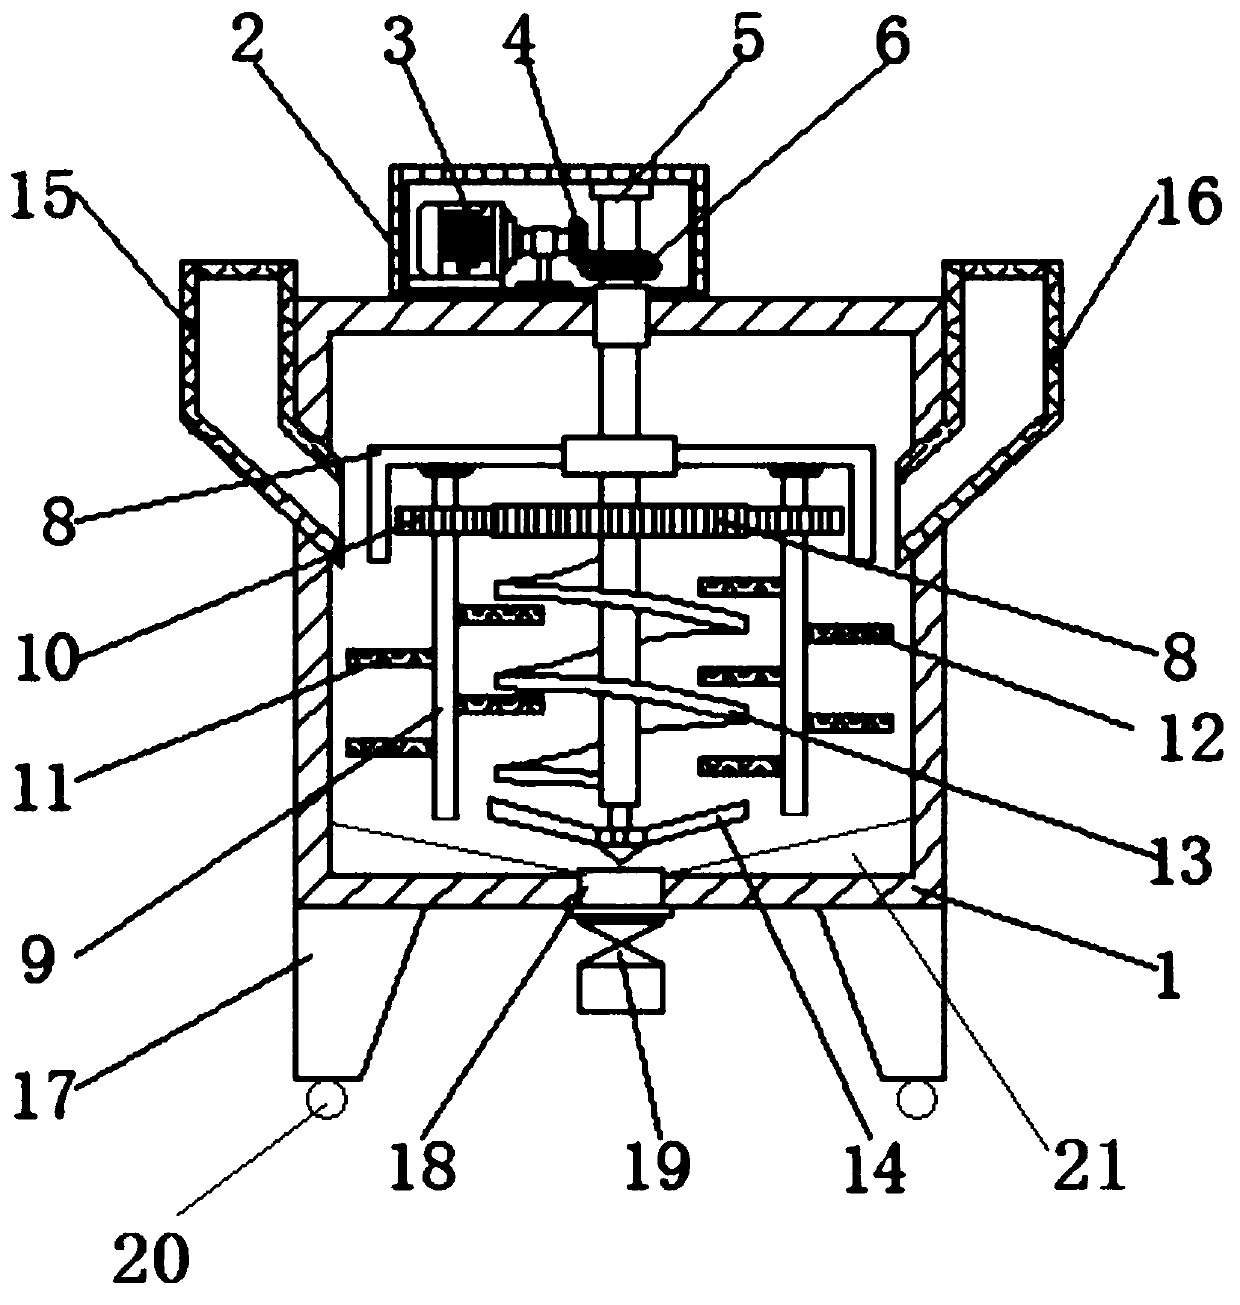 Cement stirring device used for construction engineering and convenient to move